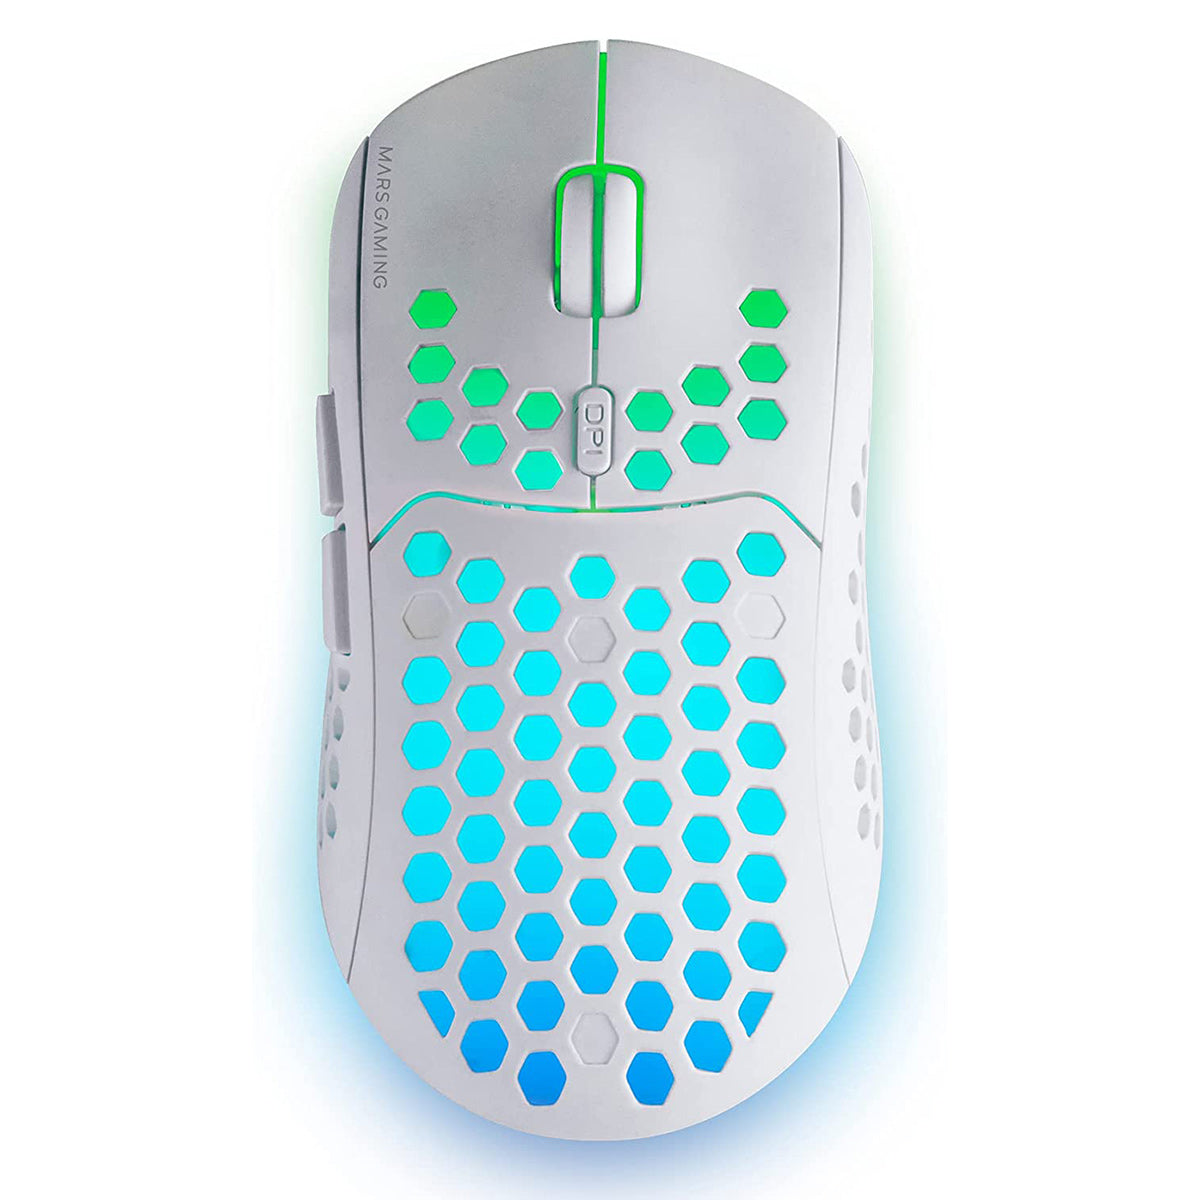 MARS GAMING MMW3 WIRELESS MOUSE, 79G ULTRA-LIGH, RECHARGEABLE BATTERY, WHITE (MMW3W)